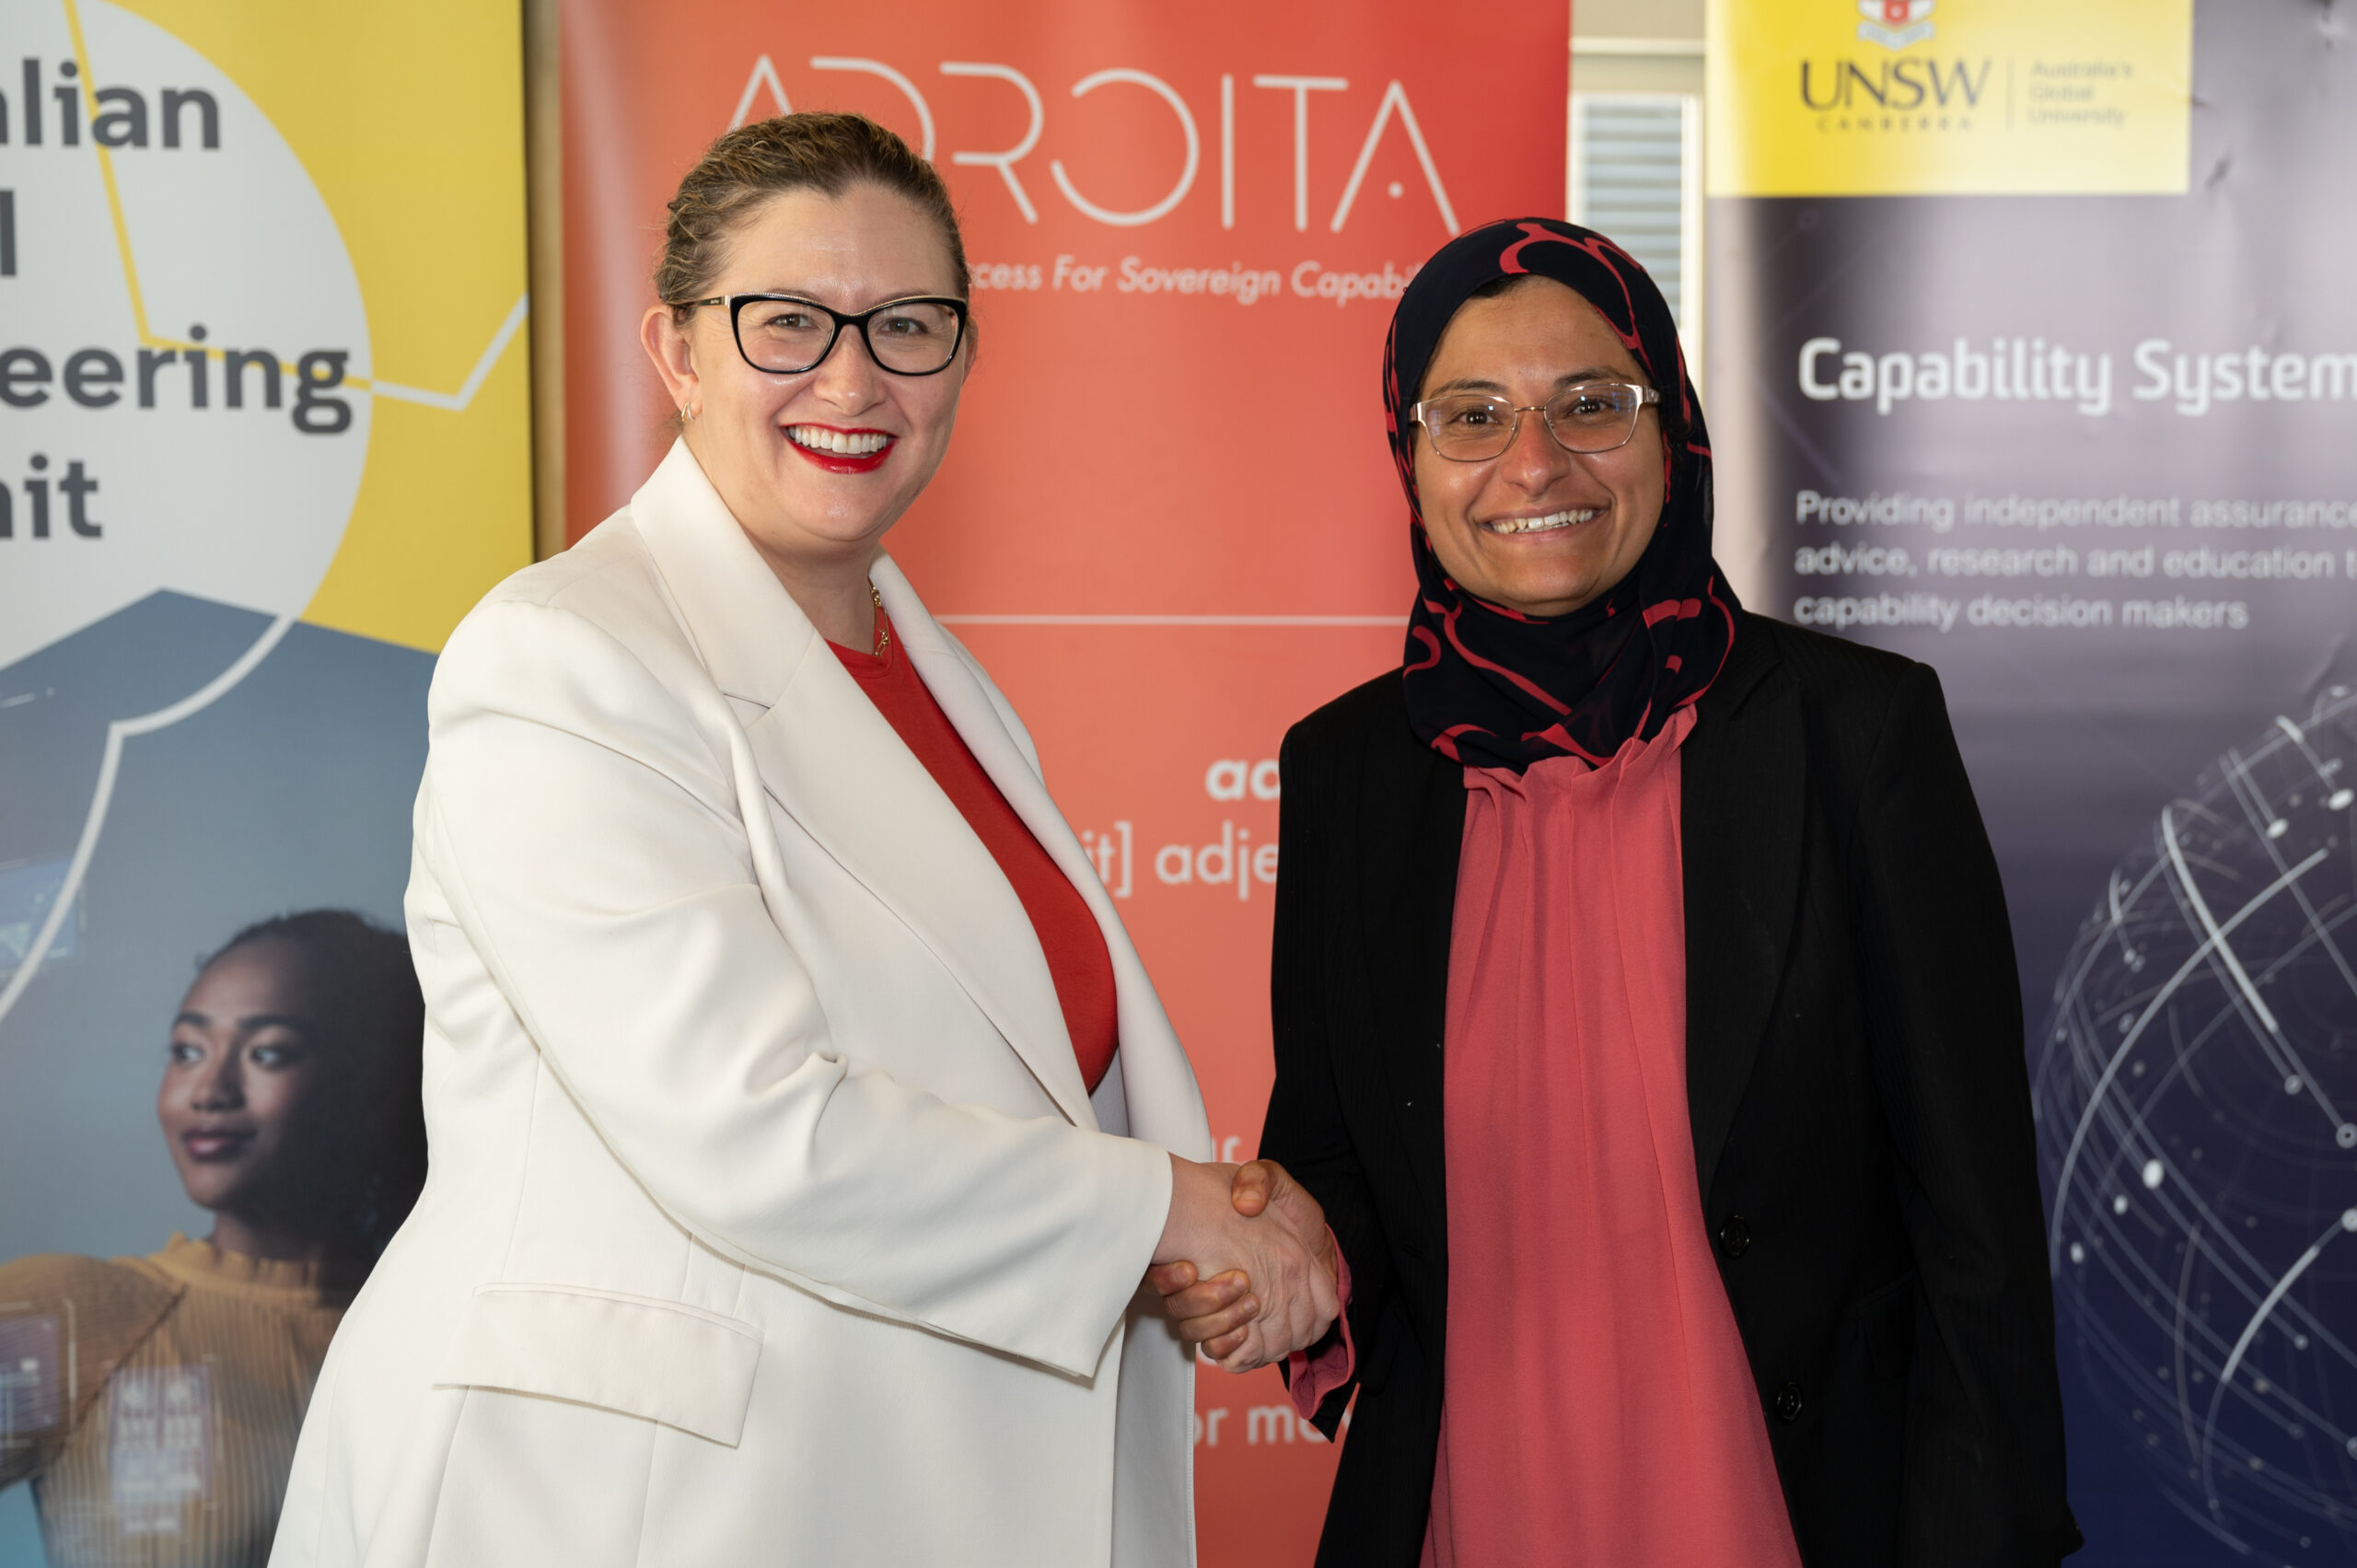 https://adroita.com.au/wp-content/uploads/2023/11/Sarah-and-Sondoss-at-UNSW-CSC-ADROITA-signing-scaled.jpg